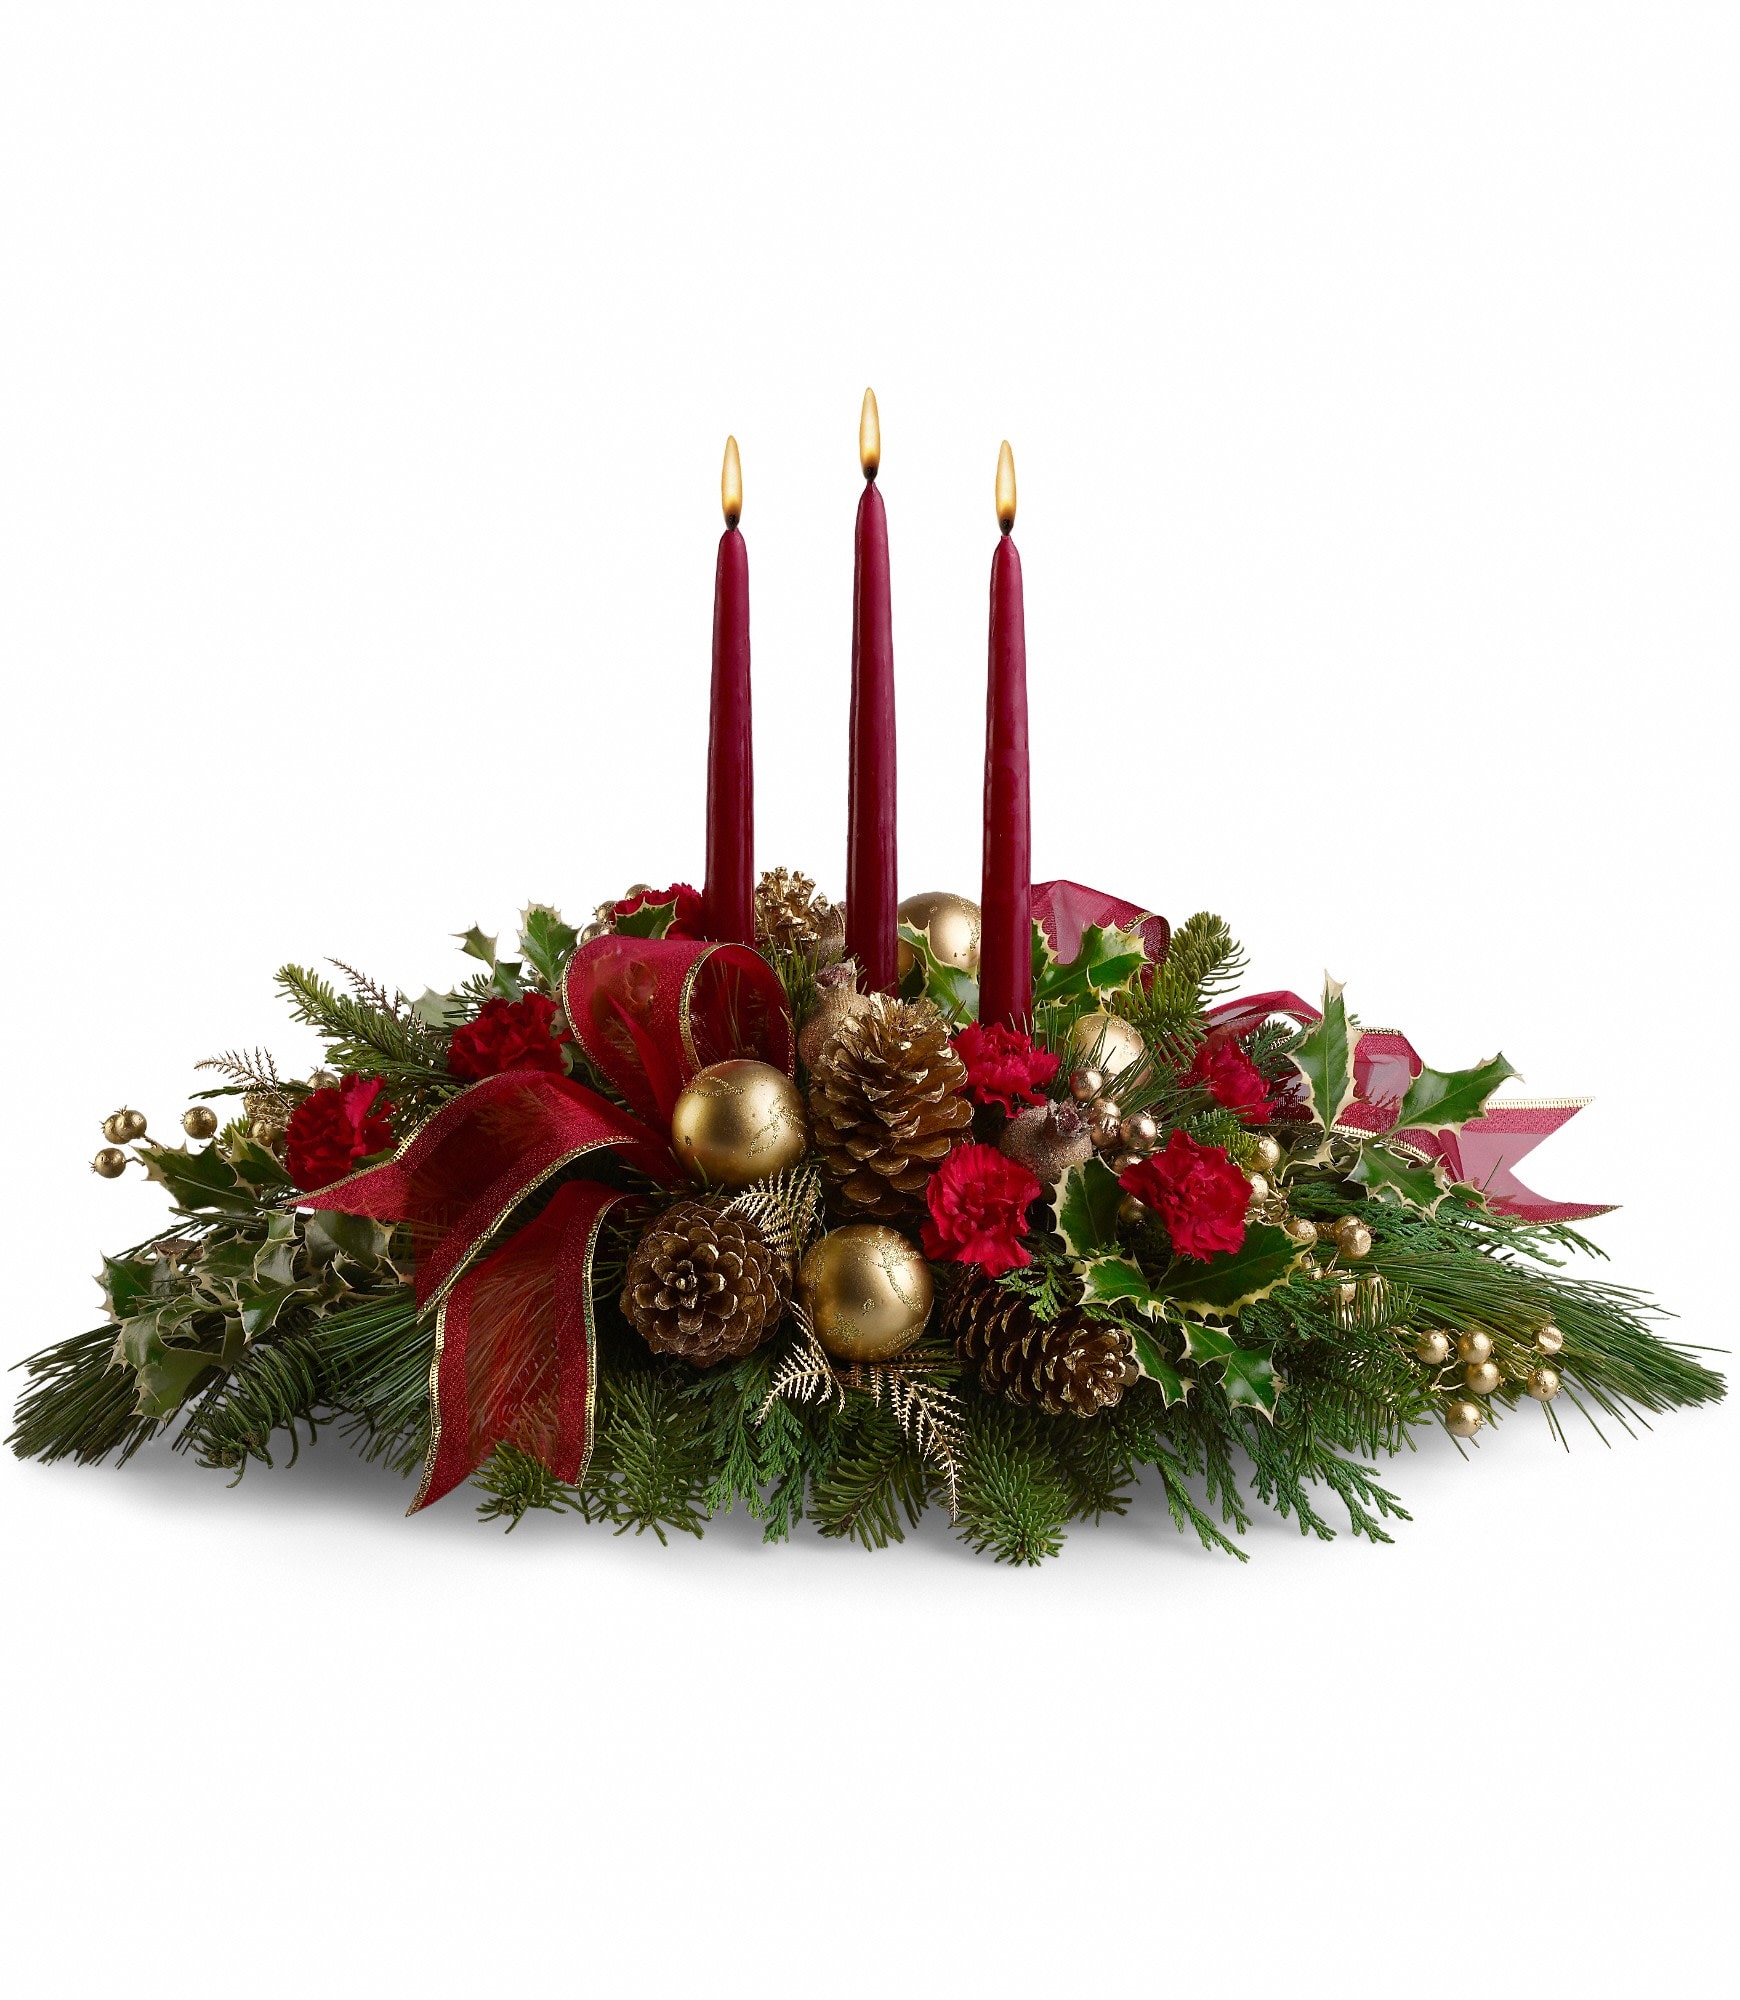 All is Bright - All will be bright this season when you order this joyful Christmas arrangement. A lovely centerpiece, it will light up the holiday festivities beautifully.    Miniature carnations are artfully on display with merry touches like shimmery ornaments, pinecones, berries, organza ribbon and holiday greens. Three graceful red taper candles add the perfect magical touch.    Approximately 23&quot; W x 16&quot; H    Orientation: All-Around    As Shown : T114-1A  Deluxe : T114-1B  Premium : T114-1C